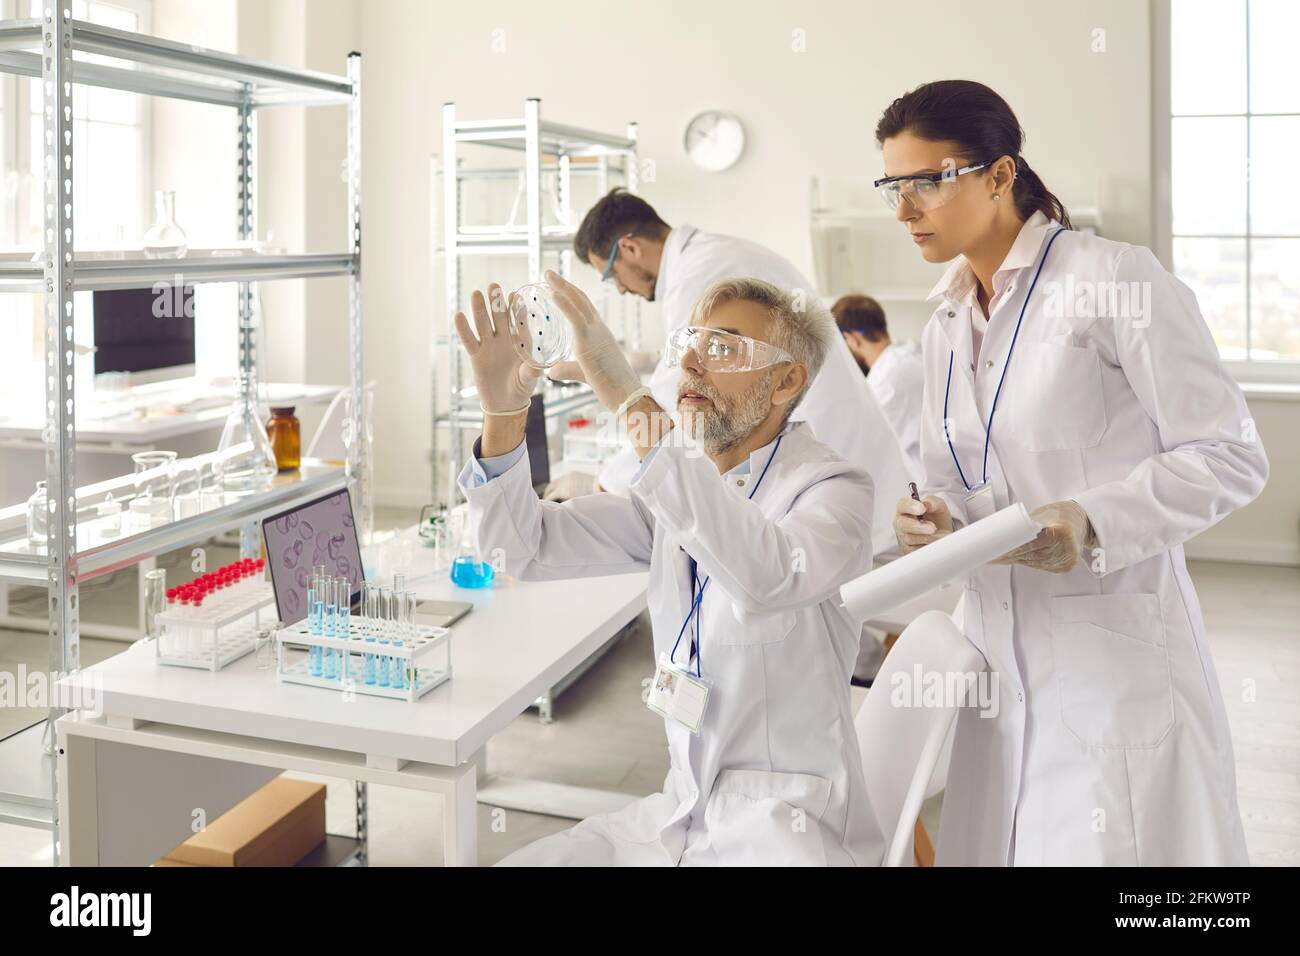 Scientist group in eyewear working at research chemistry medical laboratory Stock Photo